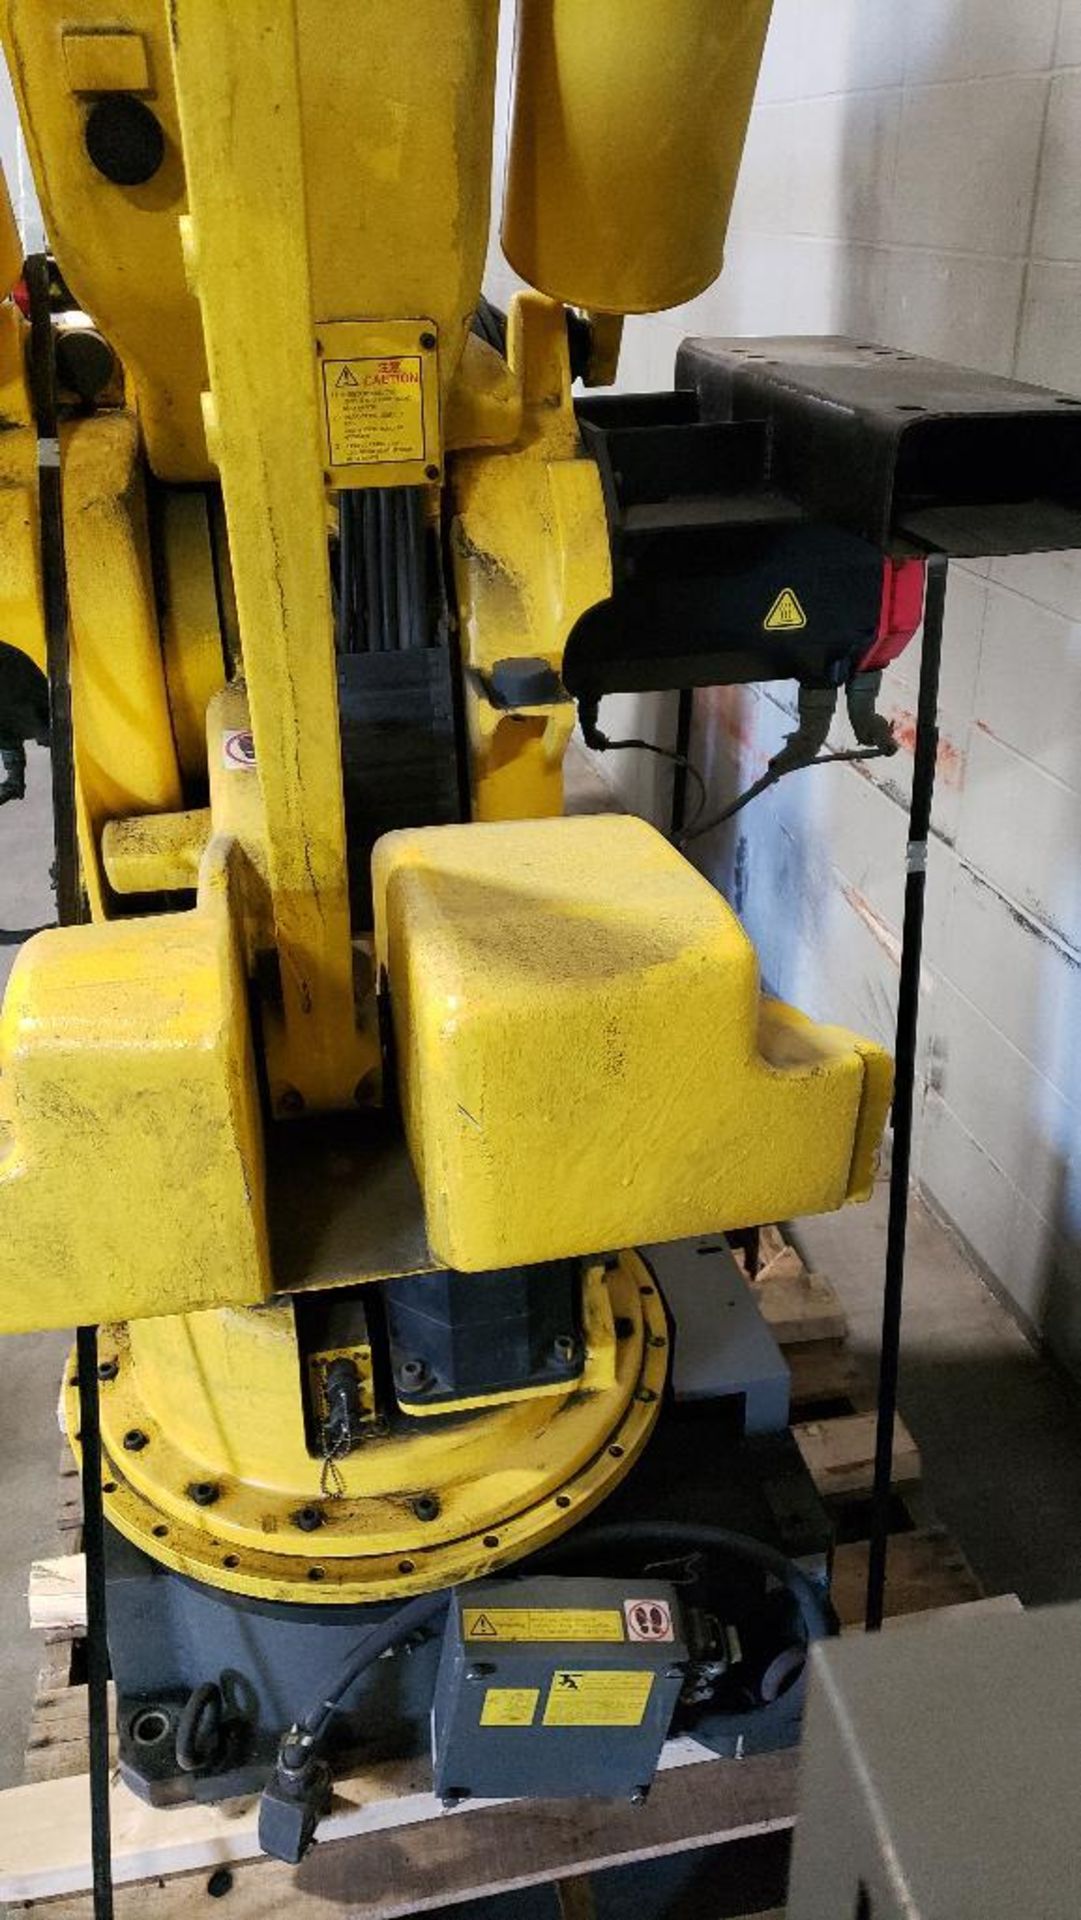 Fanuc S-420iW robot with R-J2 controller. - Image 12 of 14